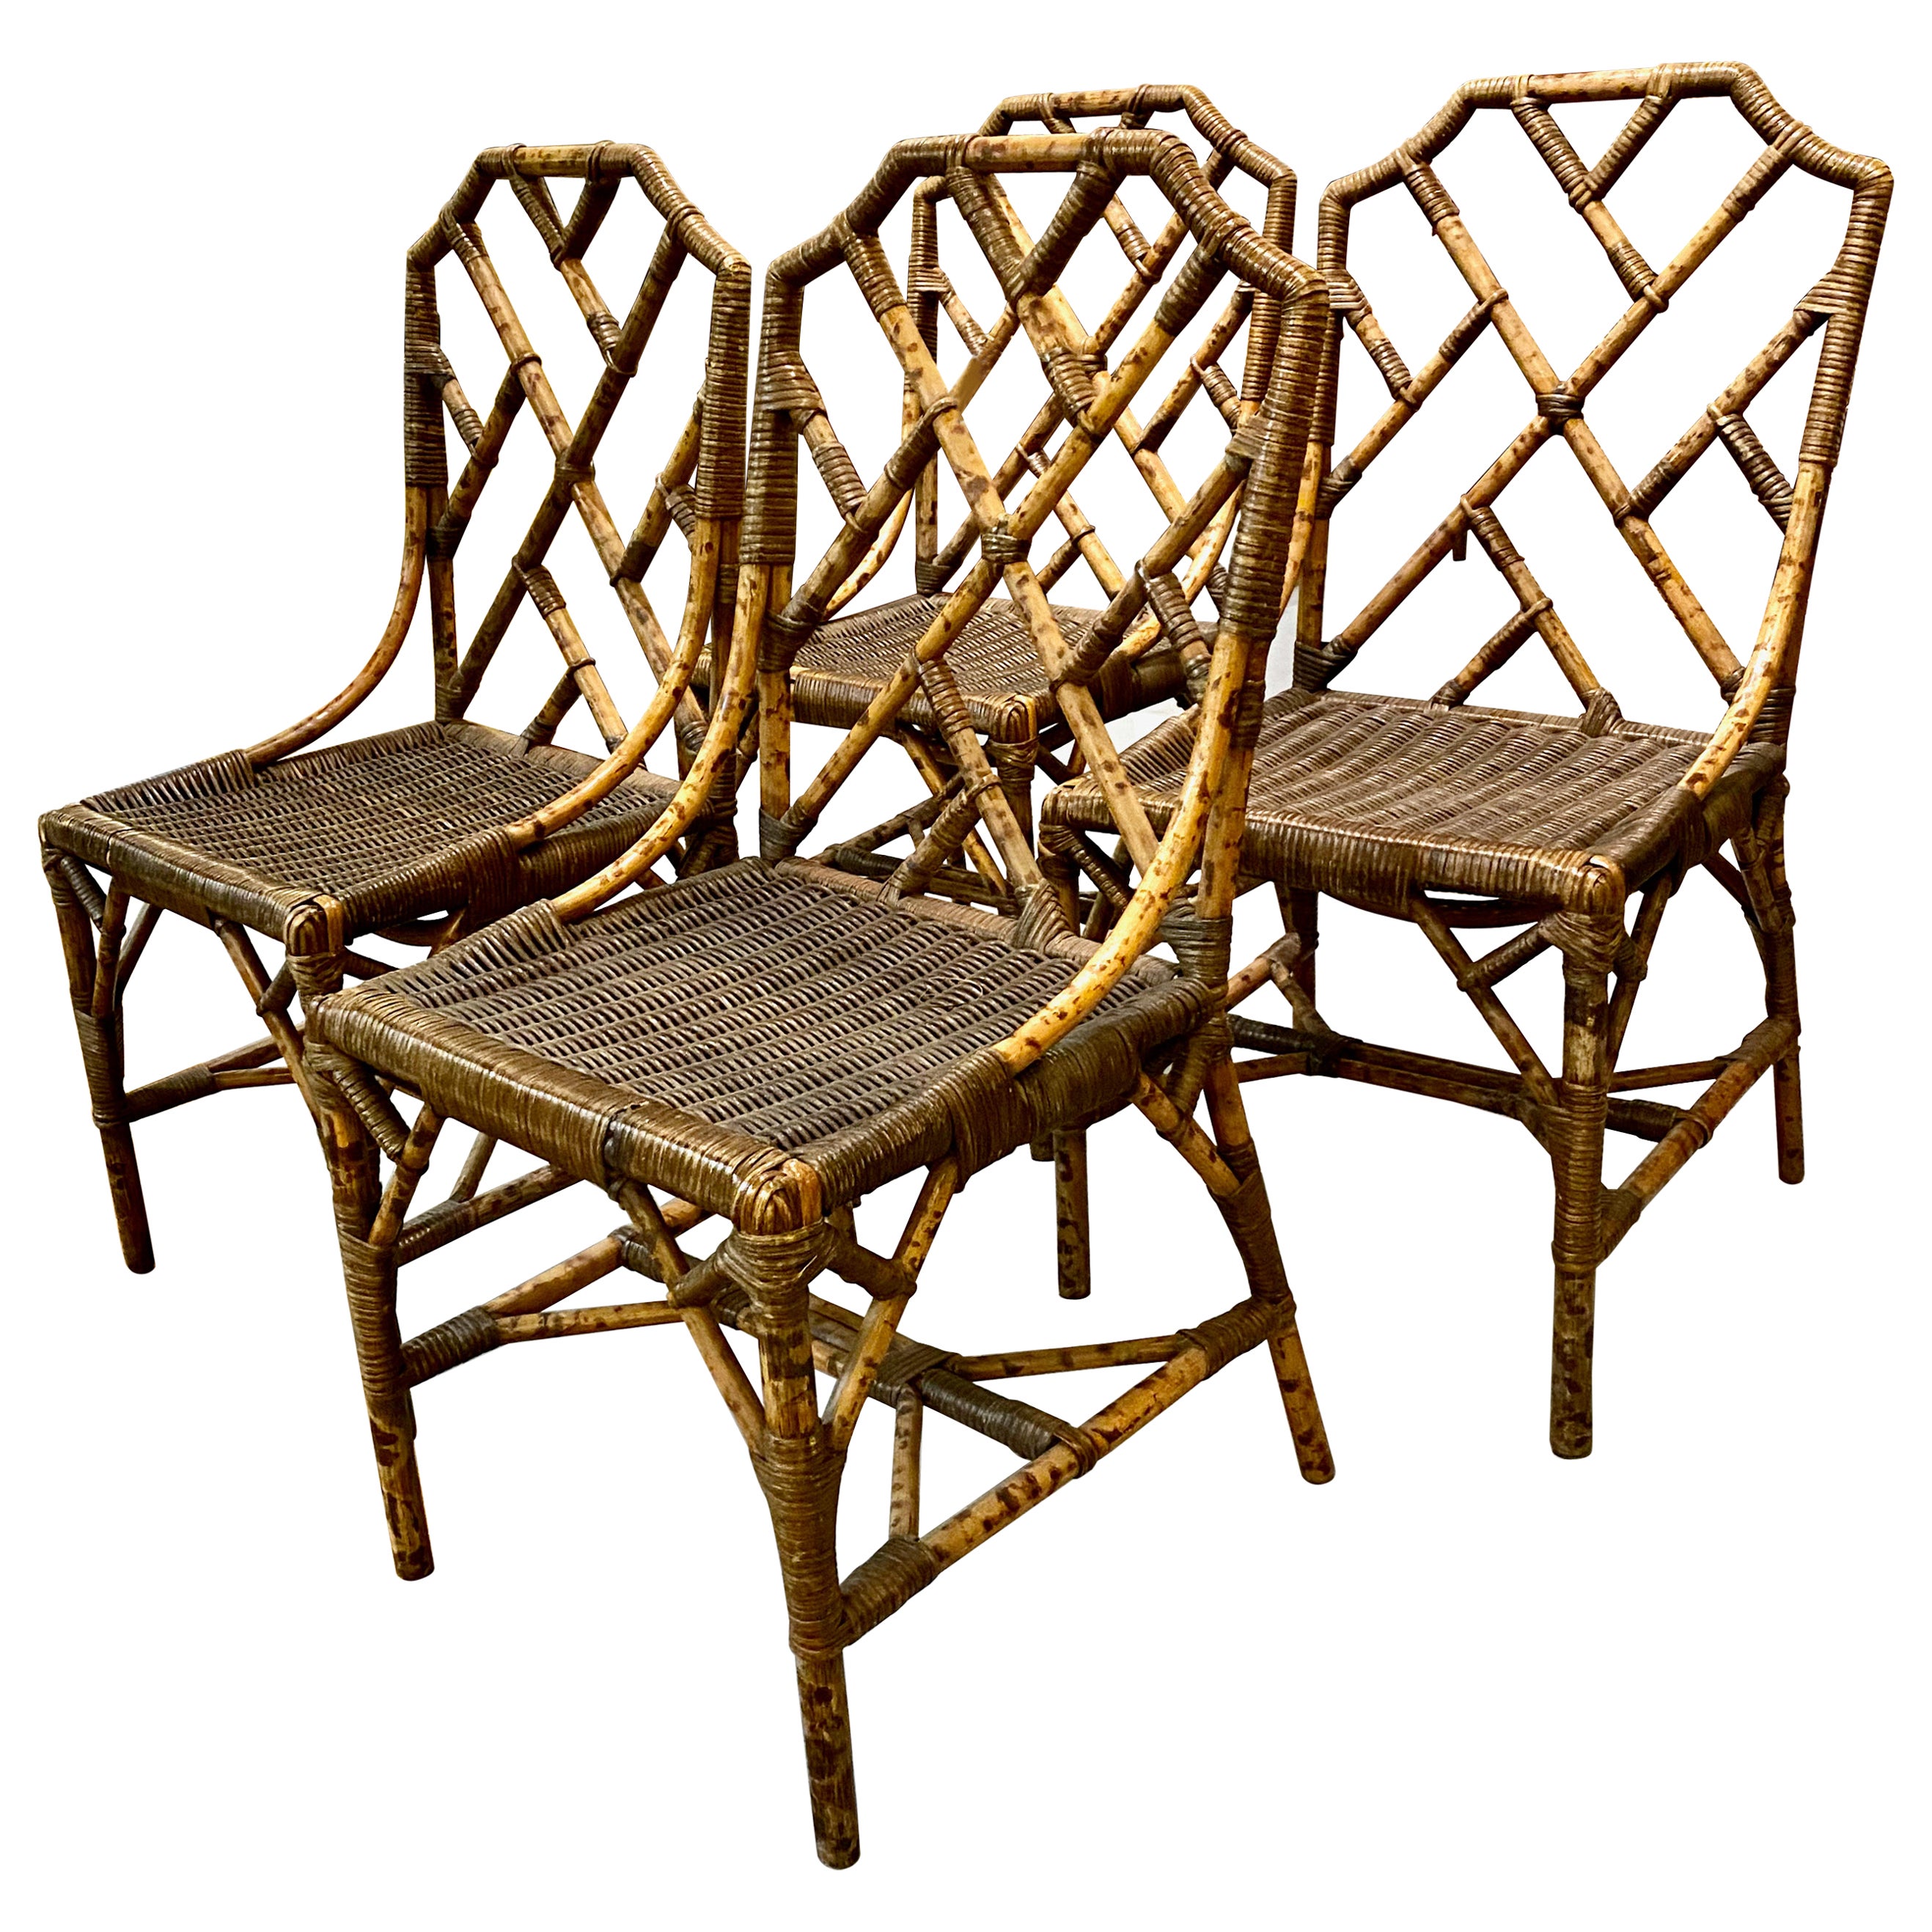 Wicker and Bamboo Side Chairs, c. 1930-1940